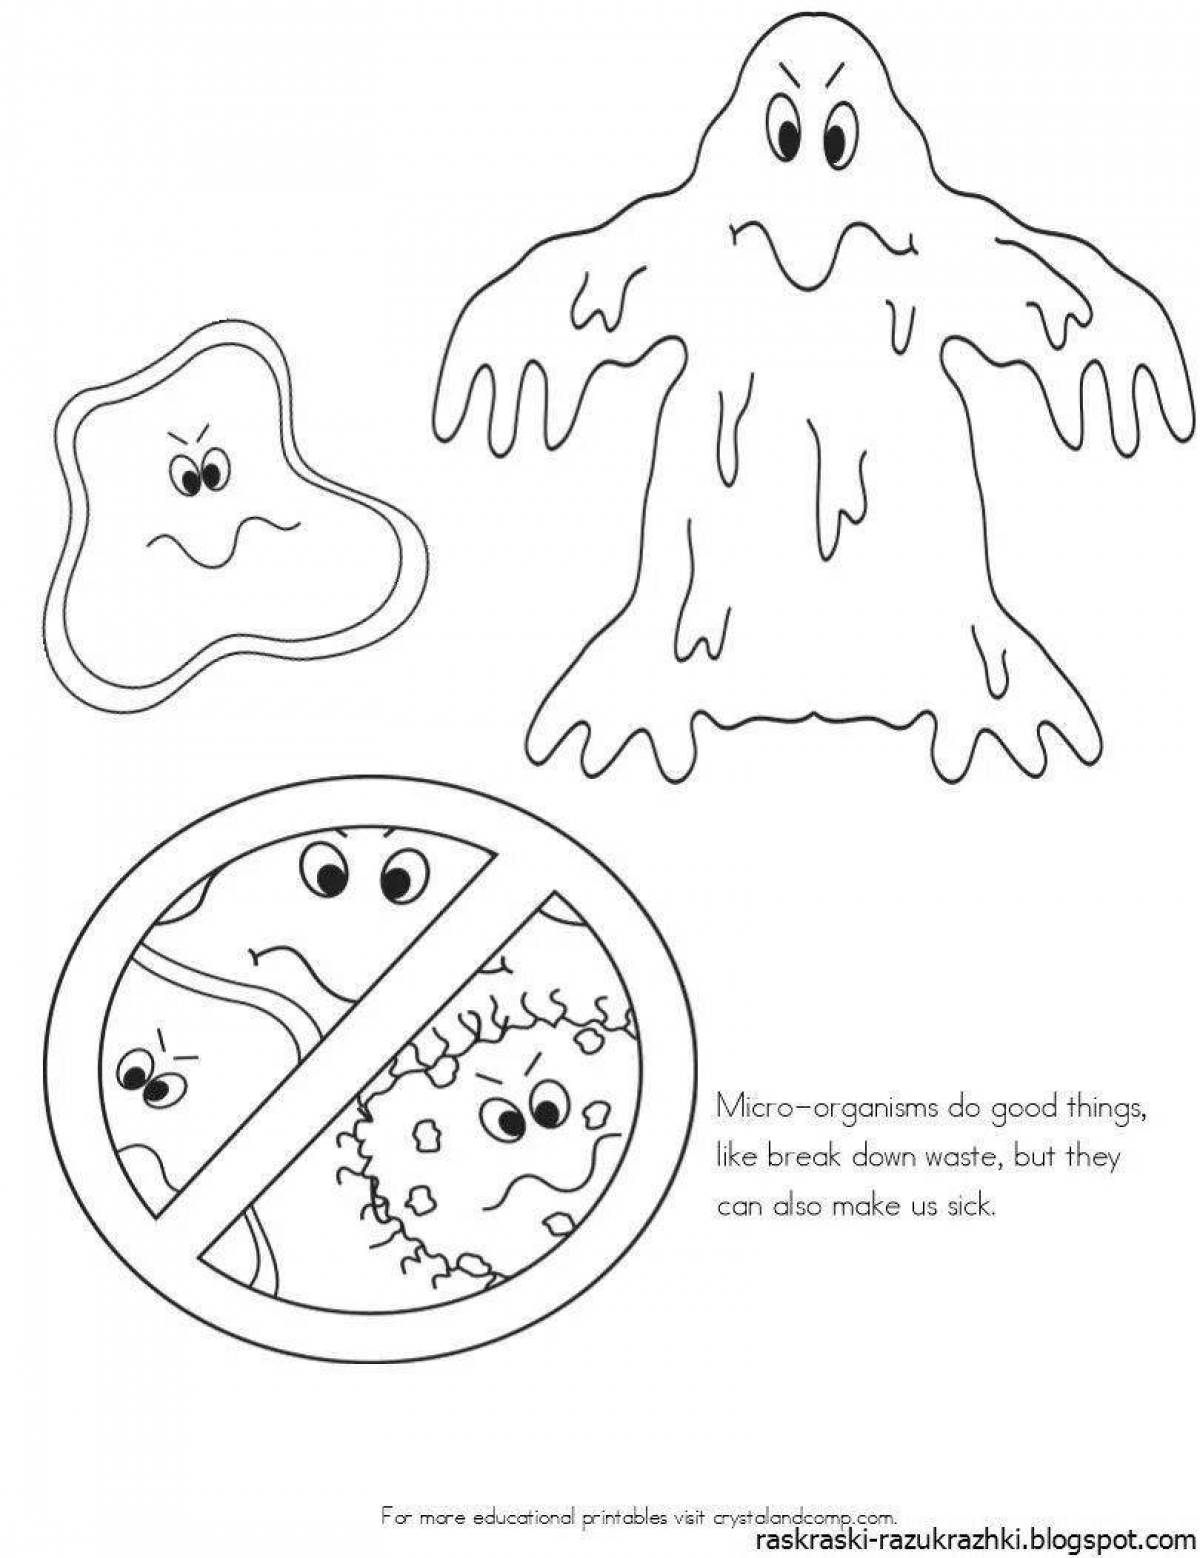 Colourful and inspiring viruses and microbes coloring pages